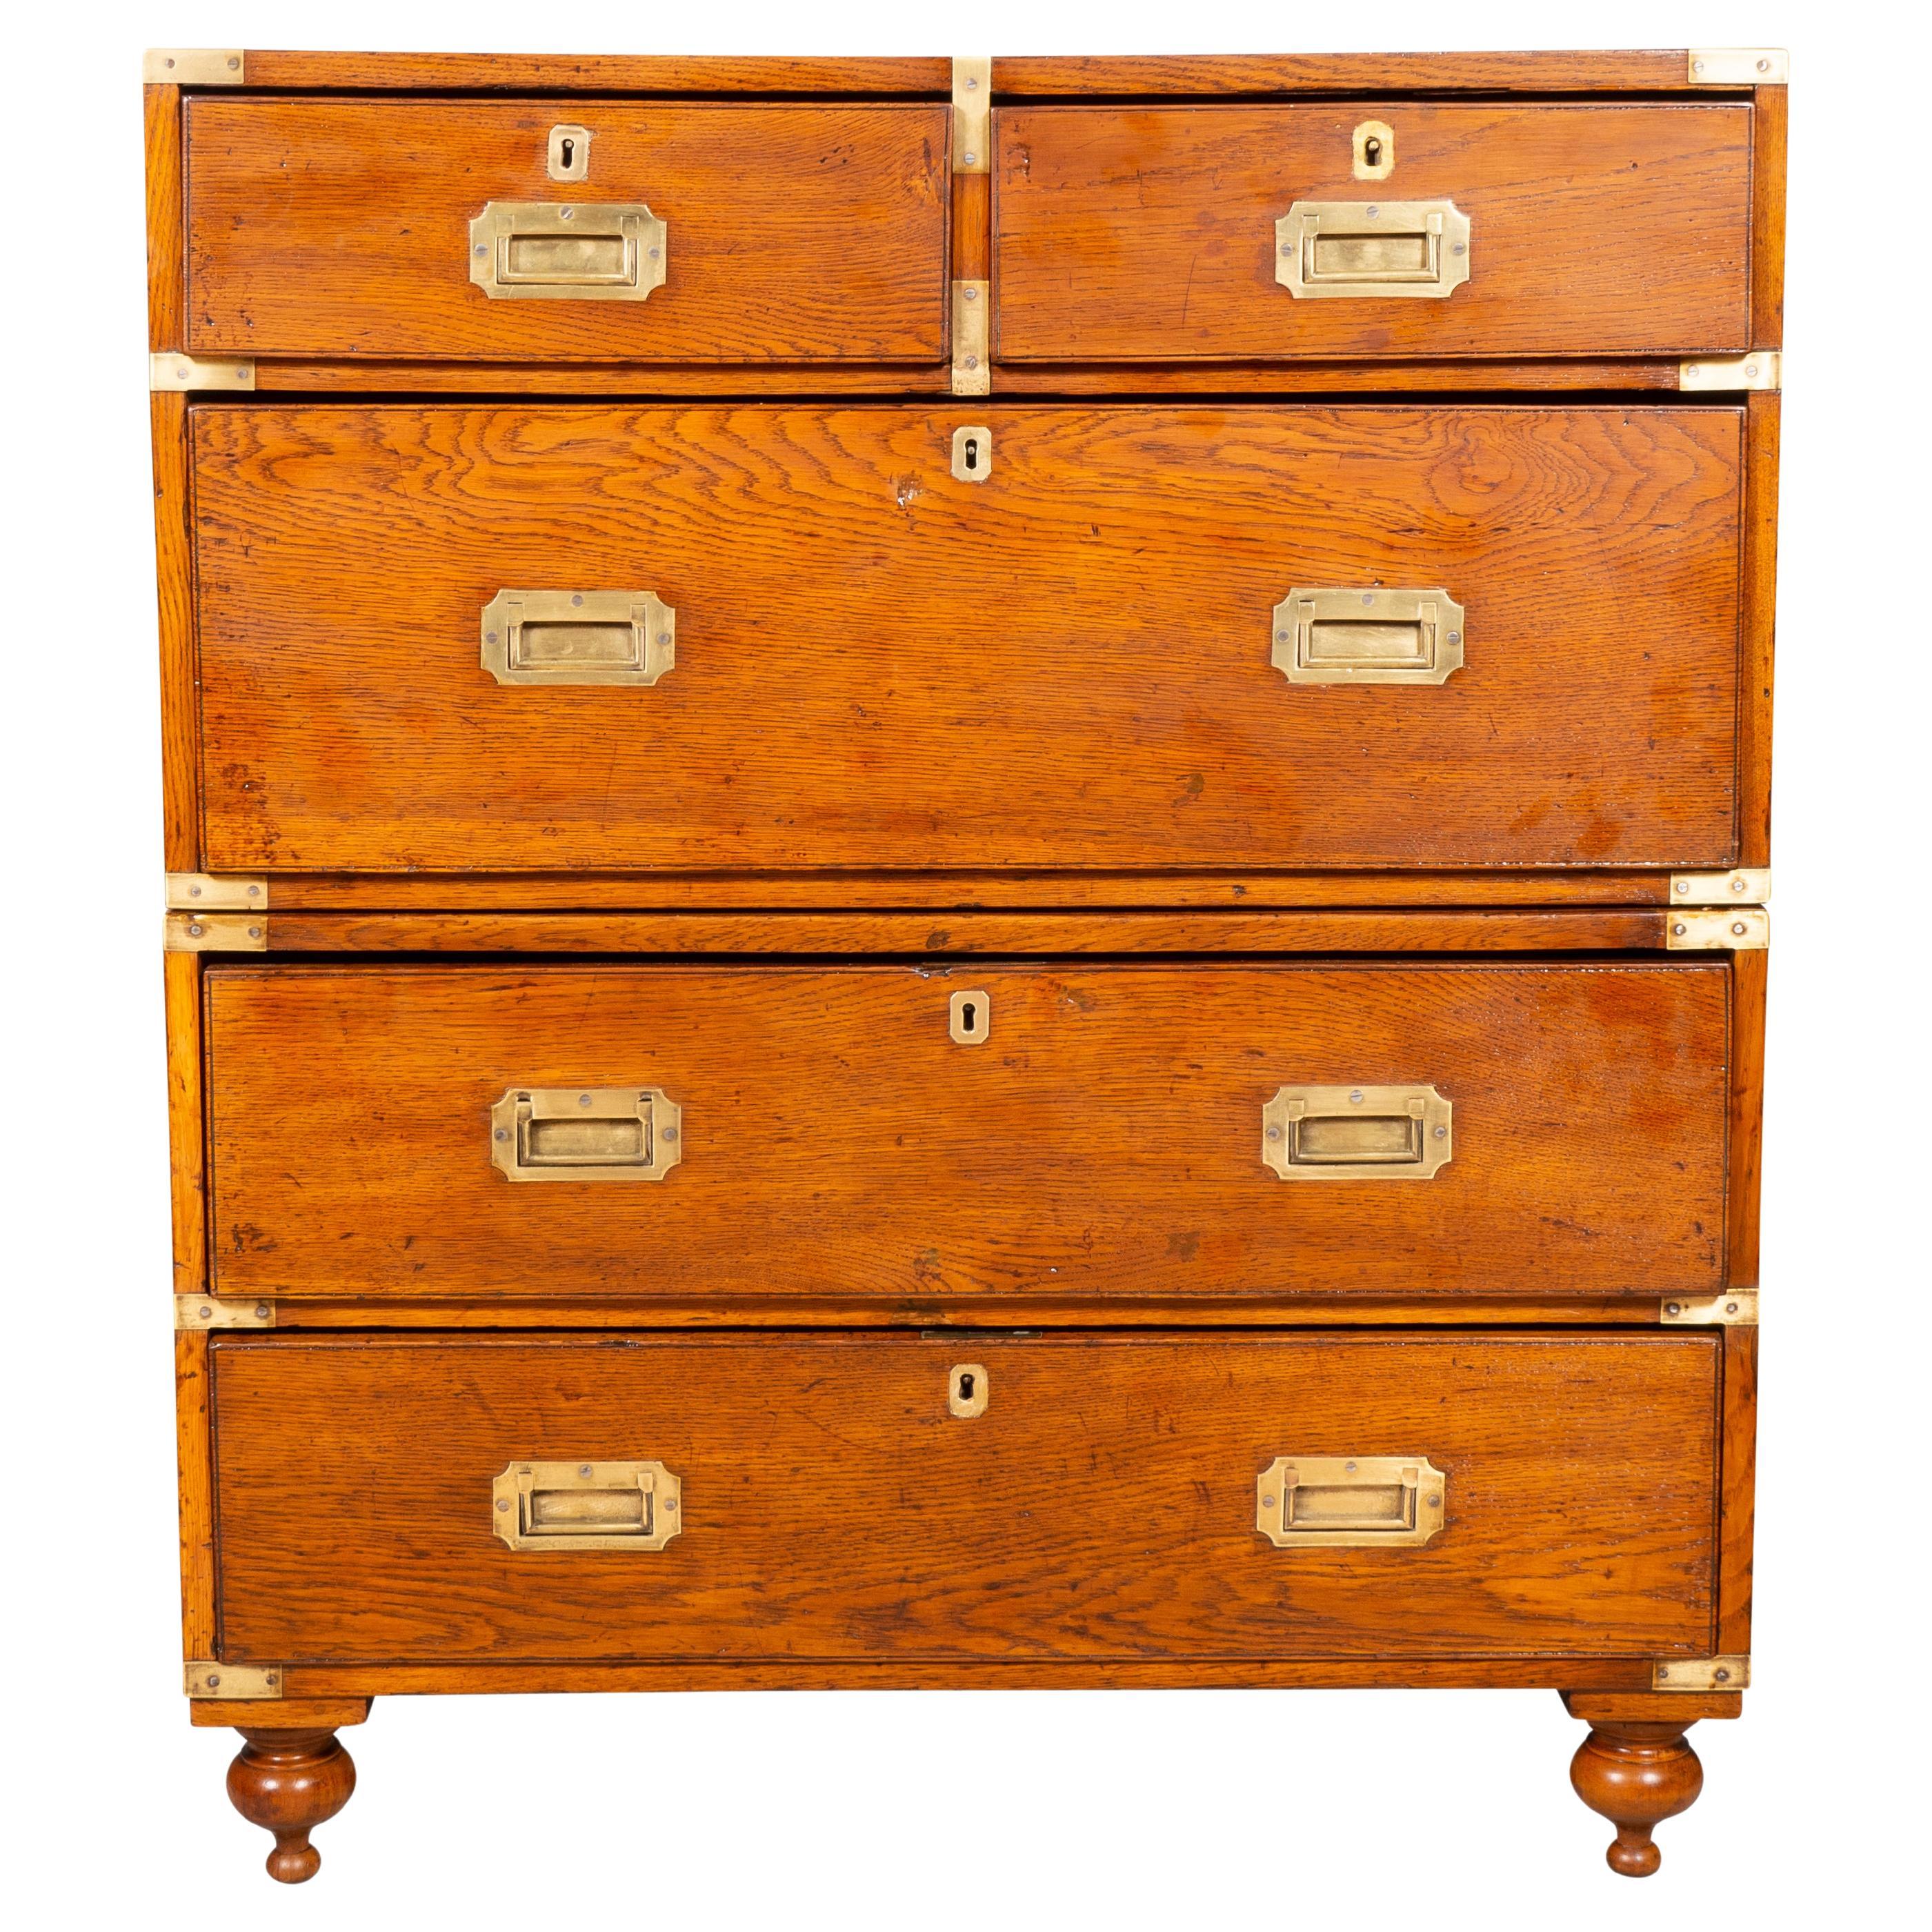 With rectangular top with brass corners over a pair of drawers over three drawers. Toupie feet. Gloucester Ma estate. In two parts. Original recessed brass handles.